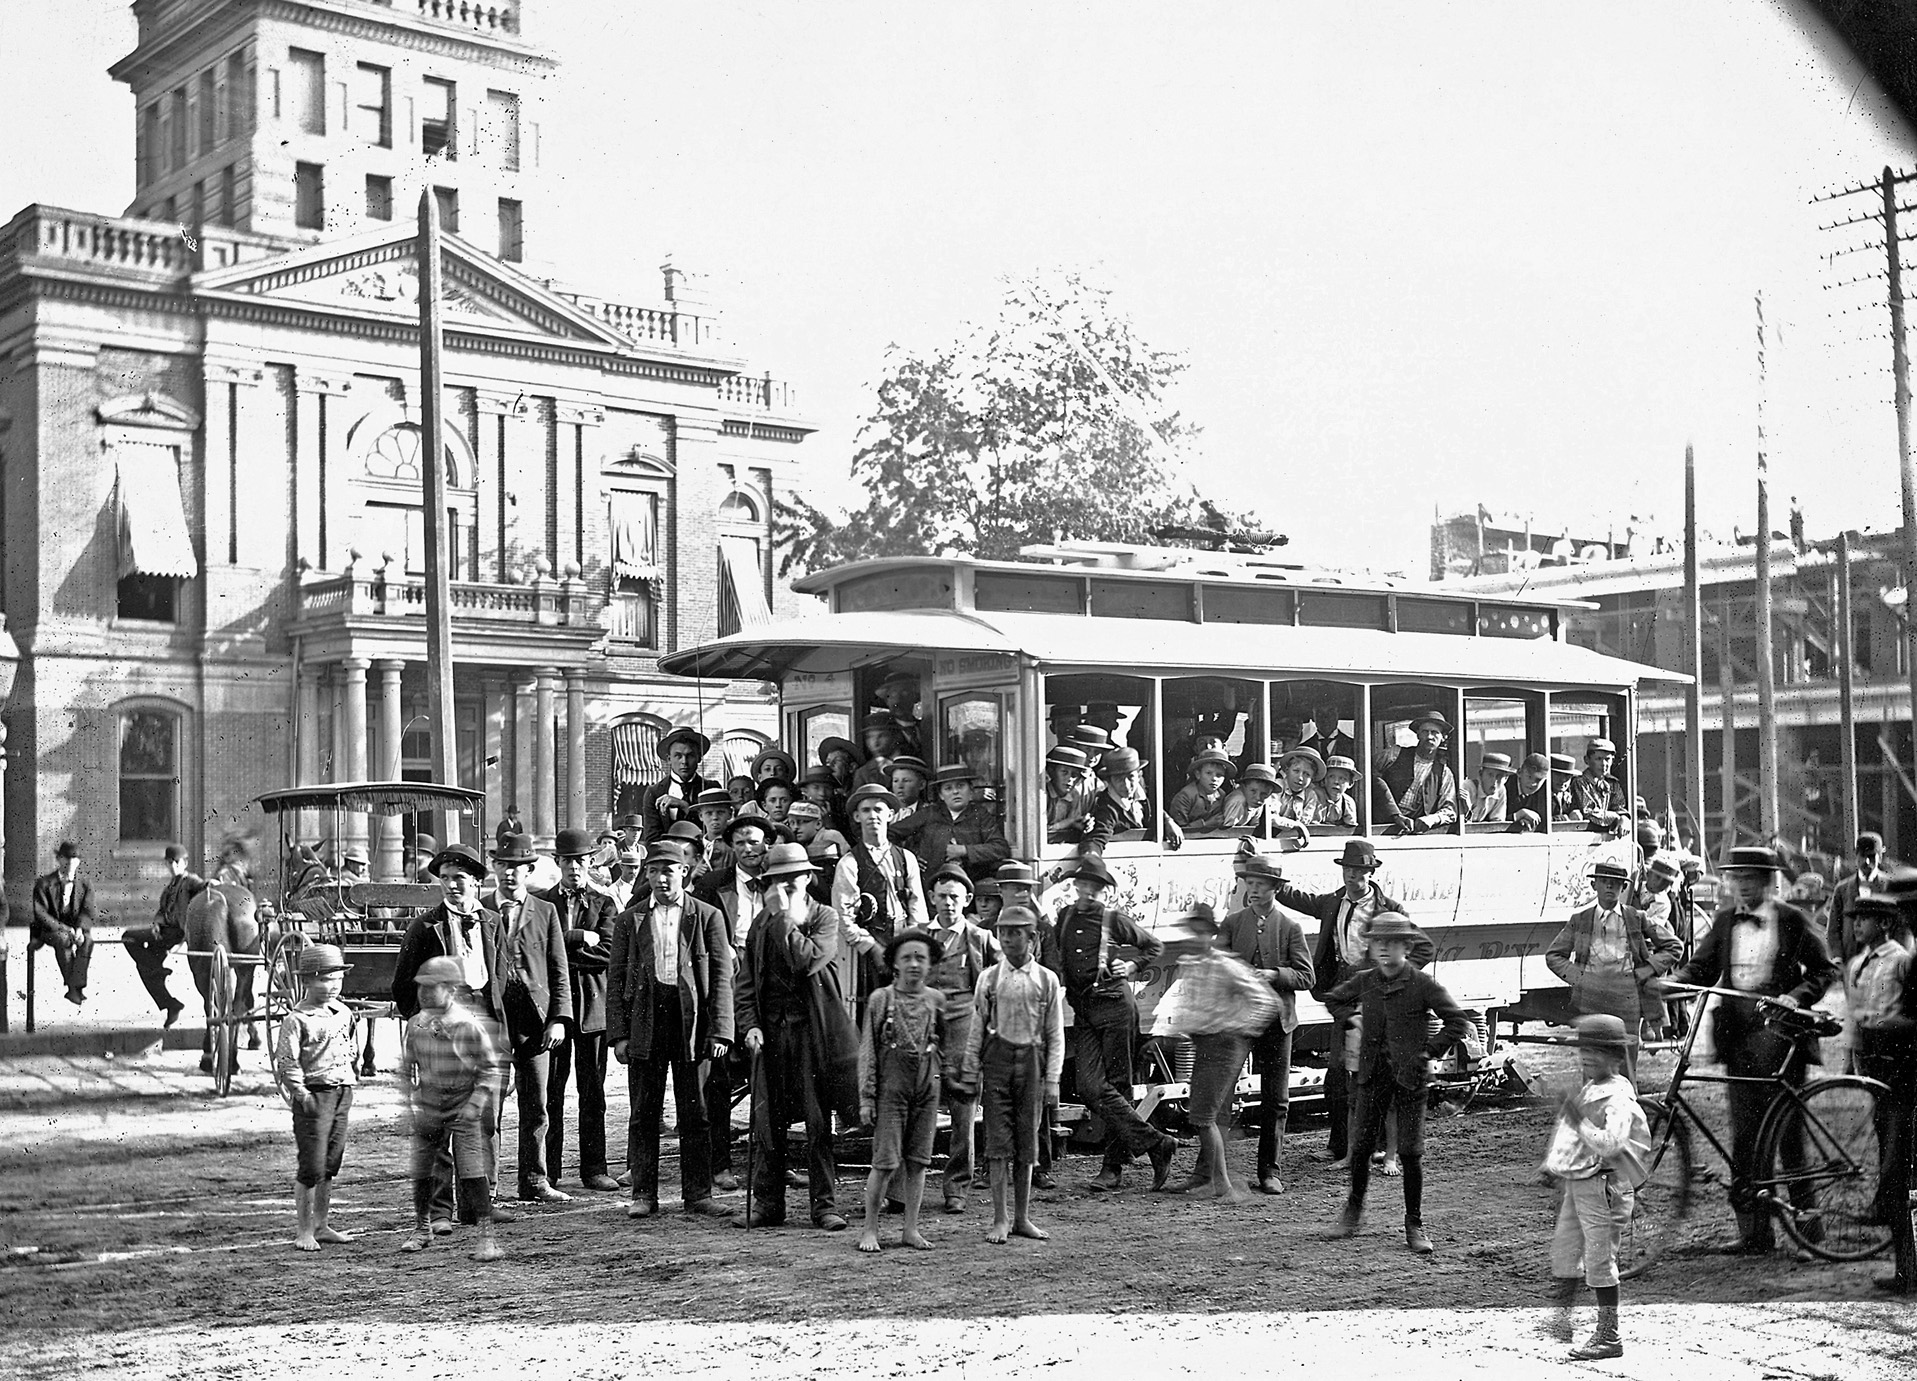 Norwalk, Ohio, somewhere between 1885 and 1905. What appears to be a new trolley service in front of the county courthouse. The side of the trolley reads: East Chestnut via Water St. From my grandfather's collection. View full size.